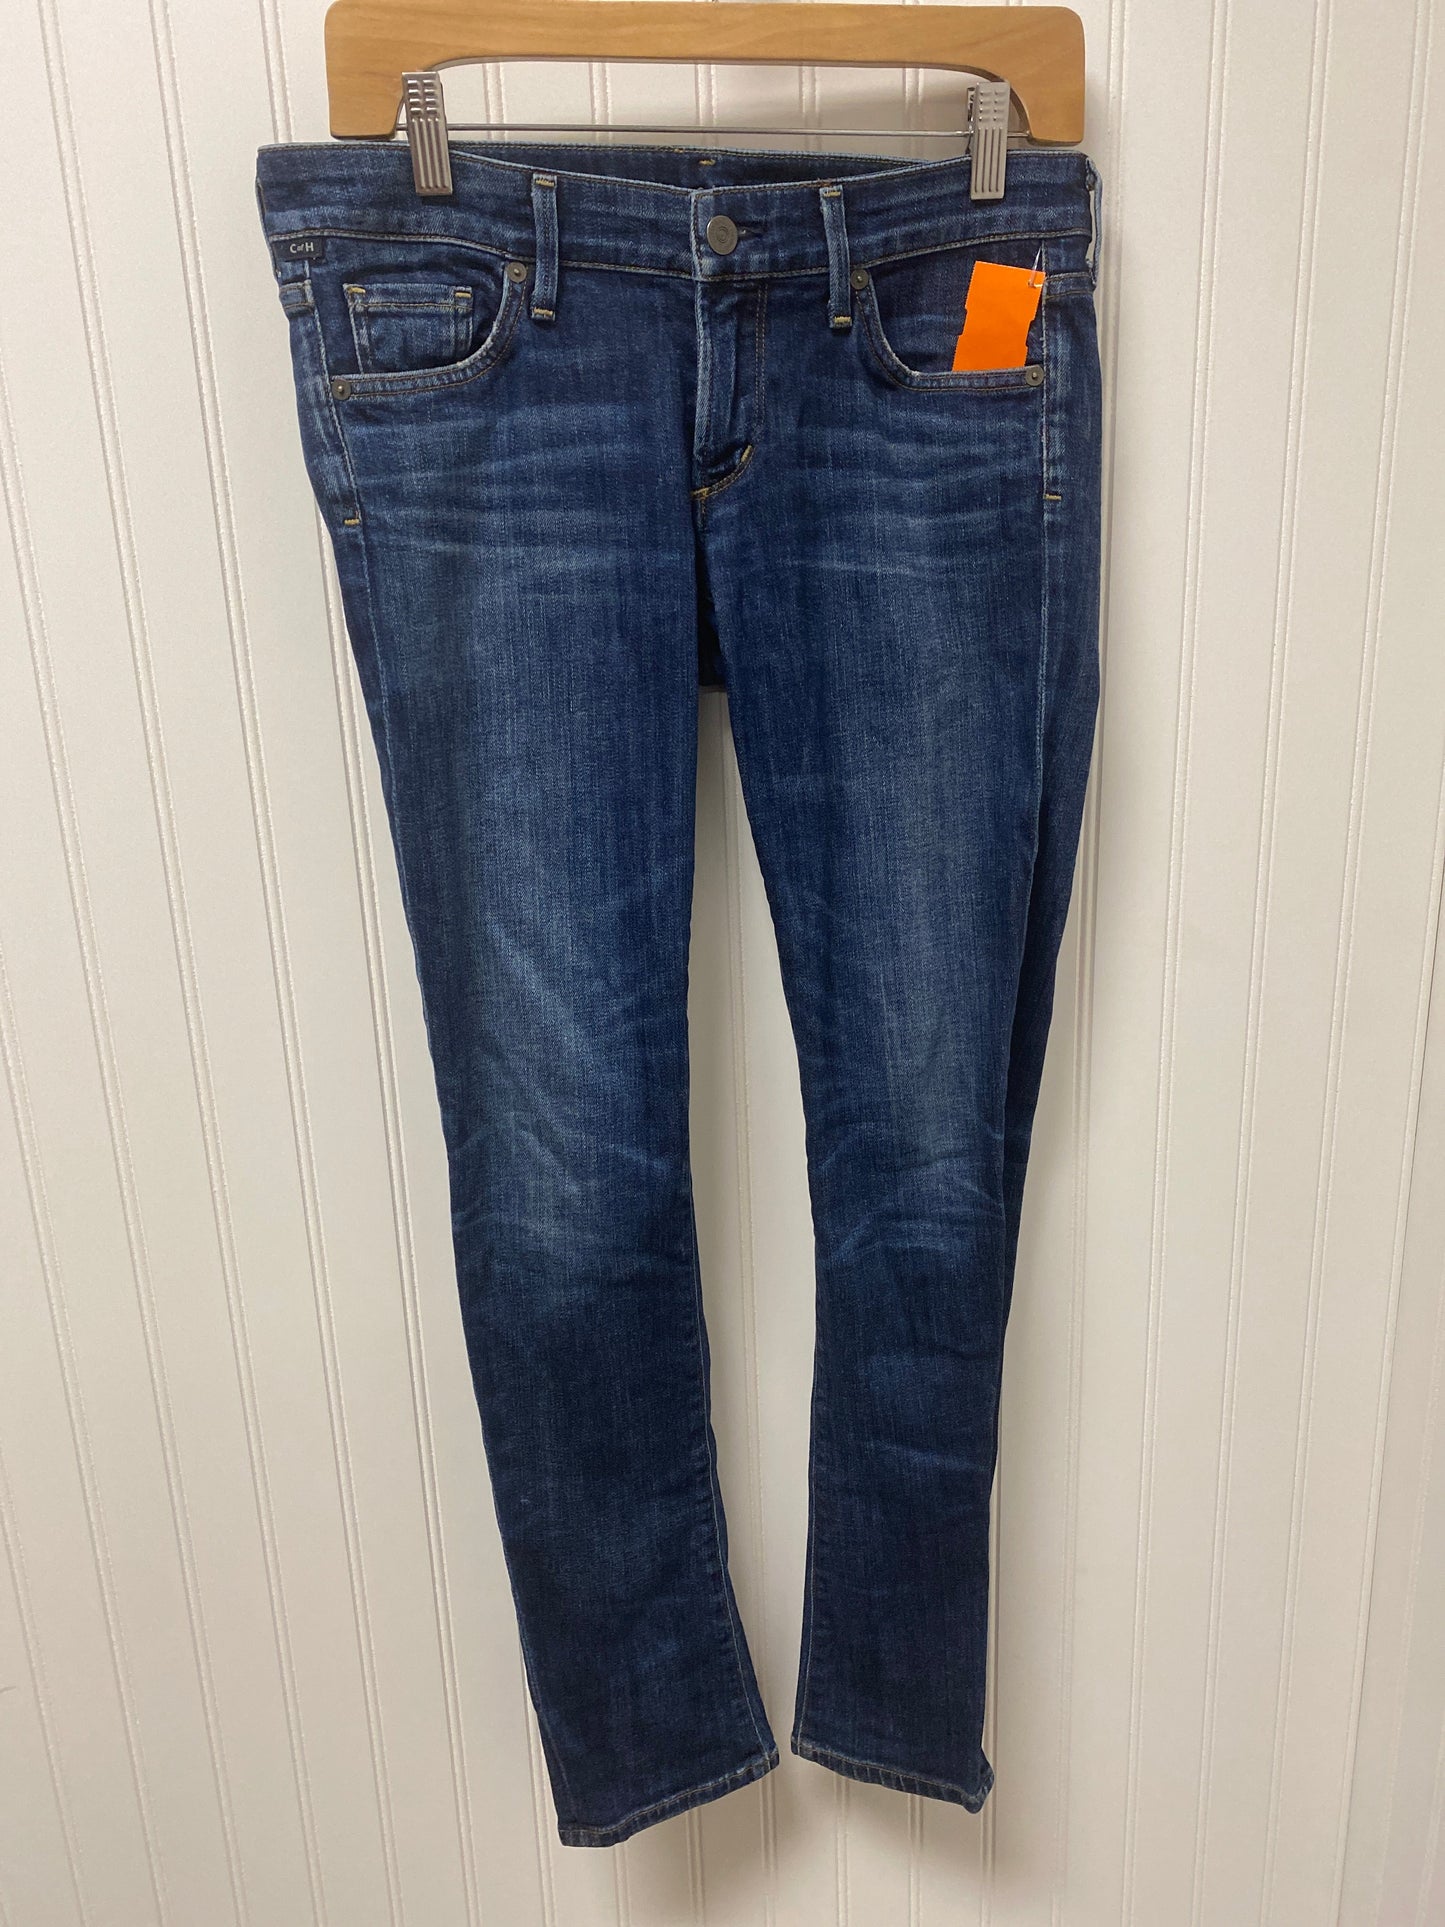 Jeans Designer By Citizens Of Humanity  Size: 6